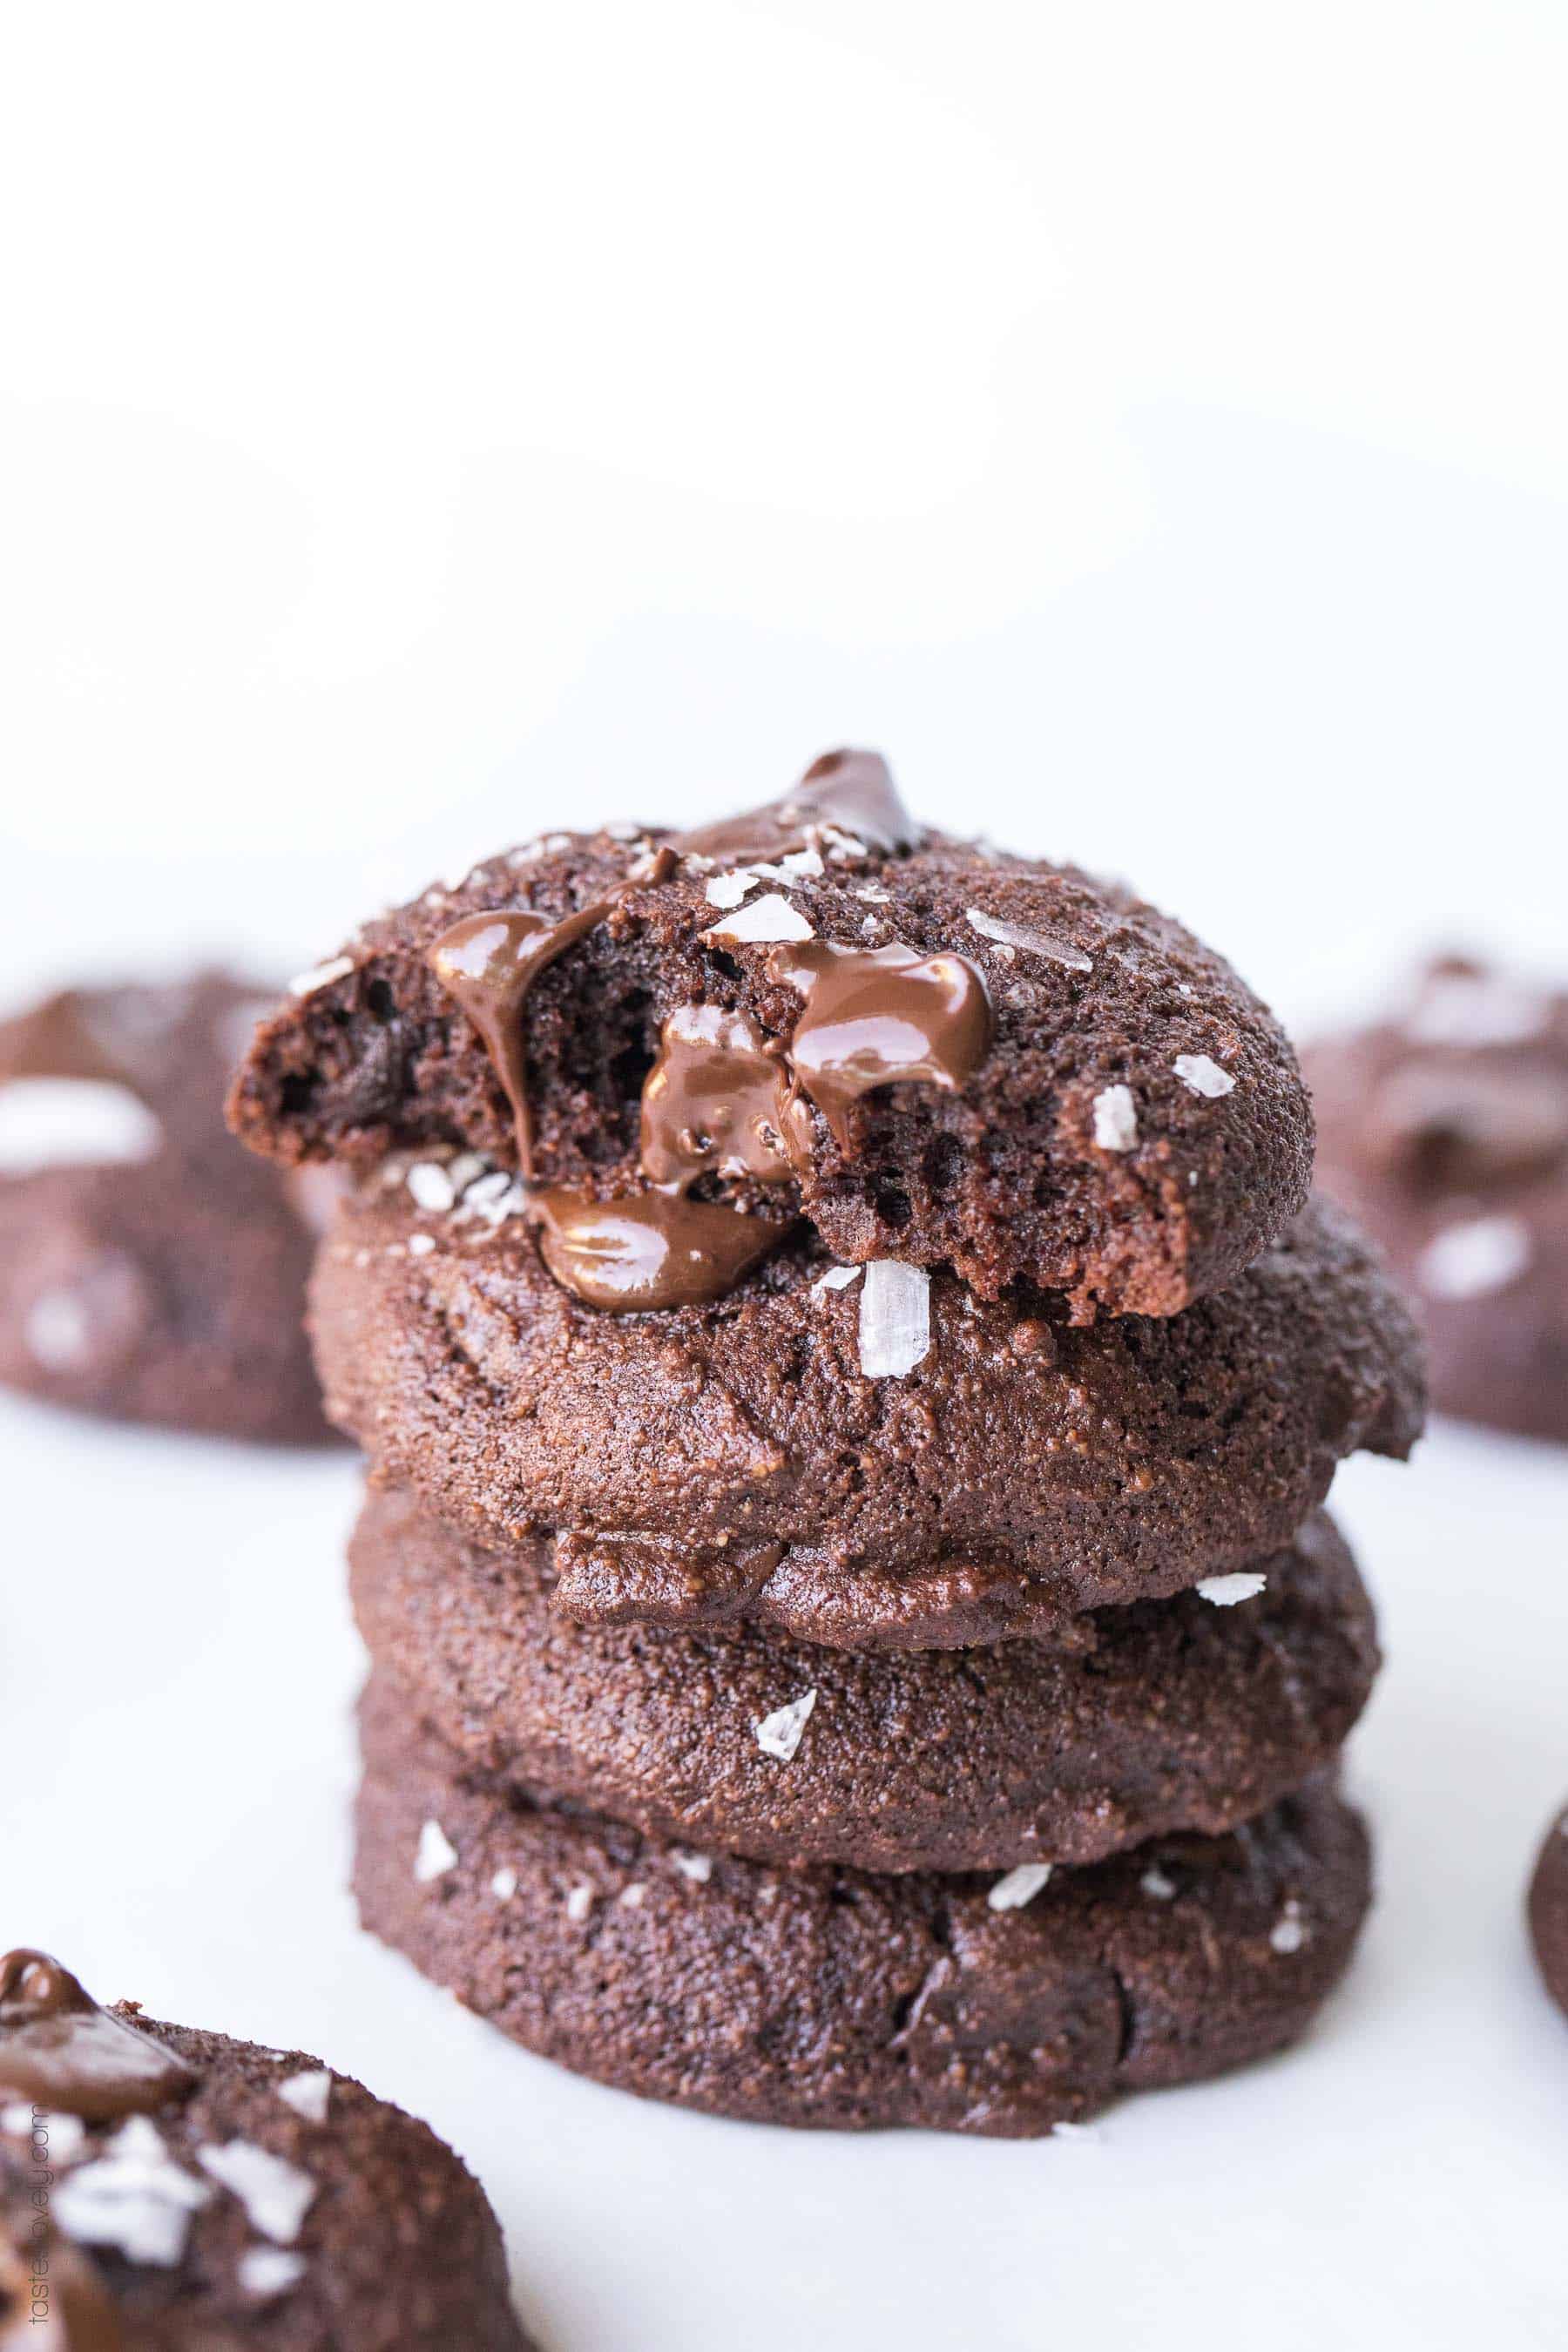 Paleo Salted Chocolate Brownie Cookies Recipe - made with almond flour and sweetened with coconut sugar! (gluten free, grain free, dairy free, refined sugar free, clean eating, keto